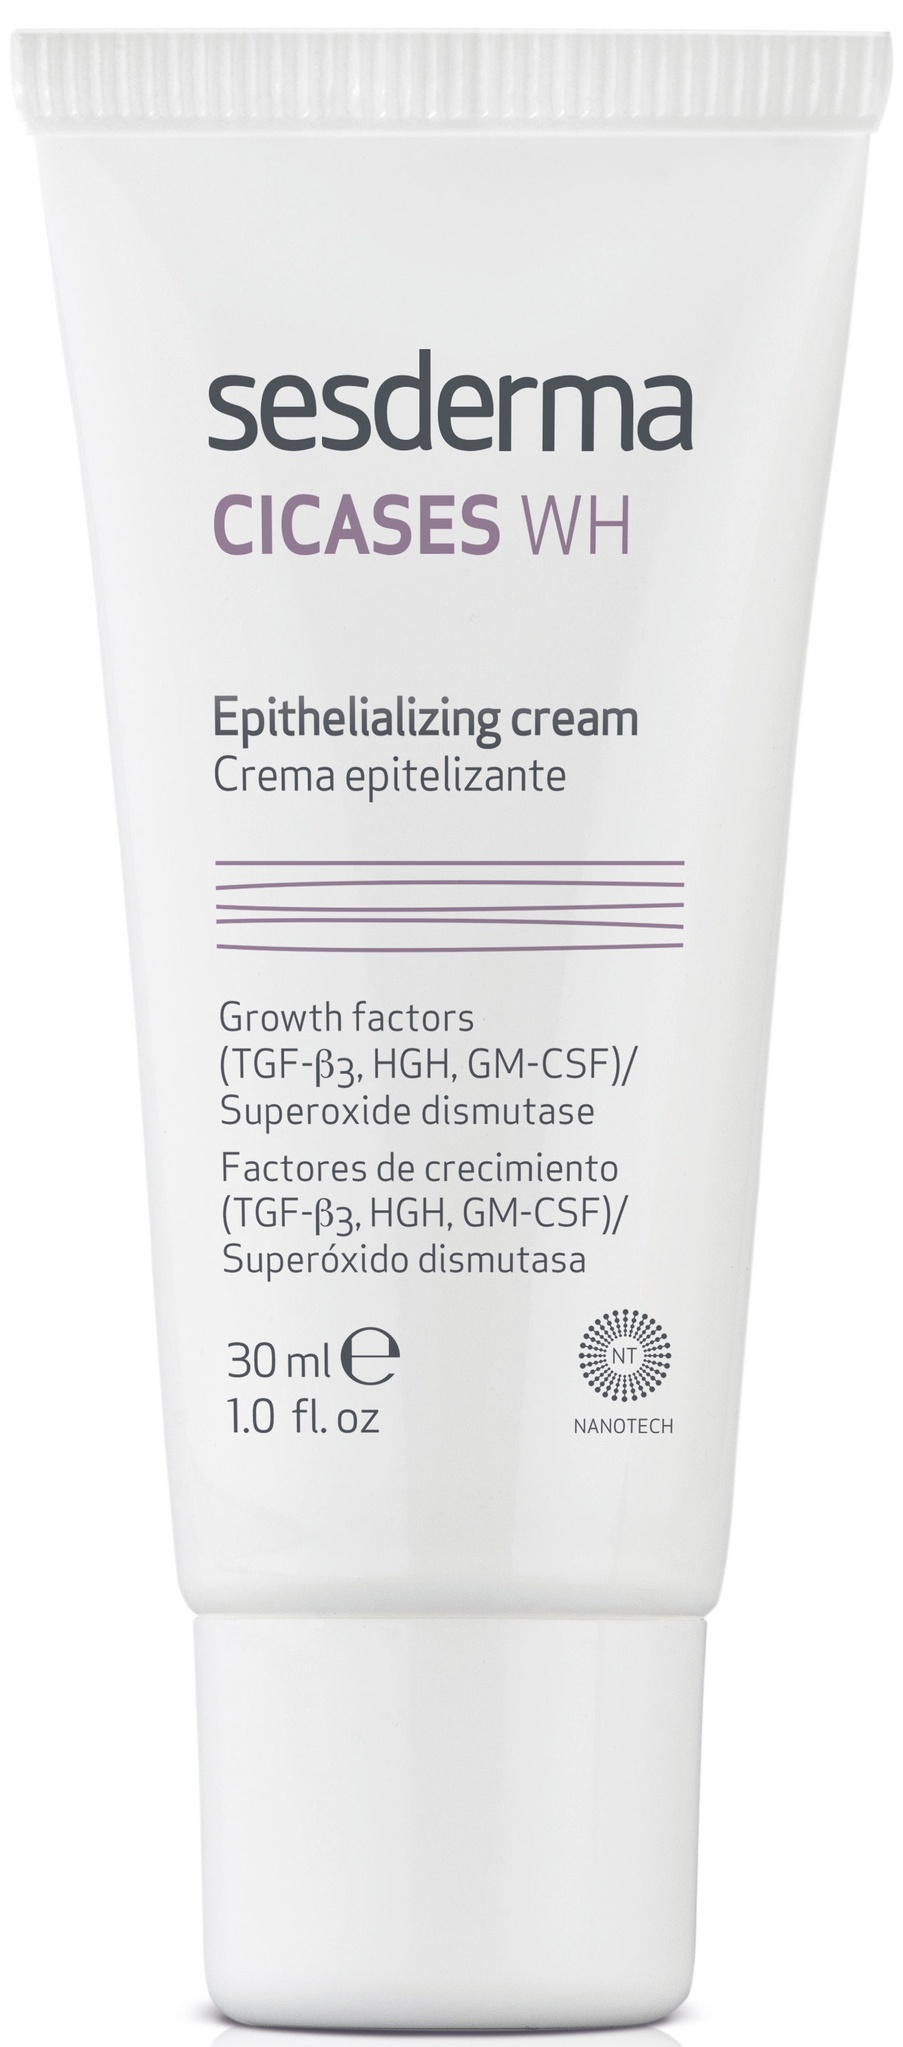 Sesderma Cicases WH